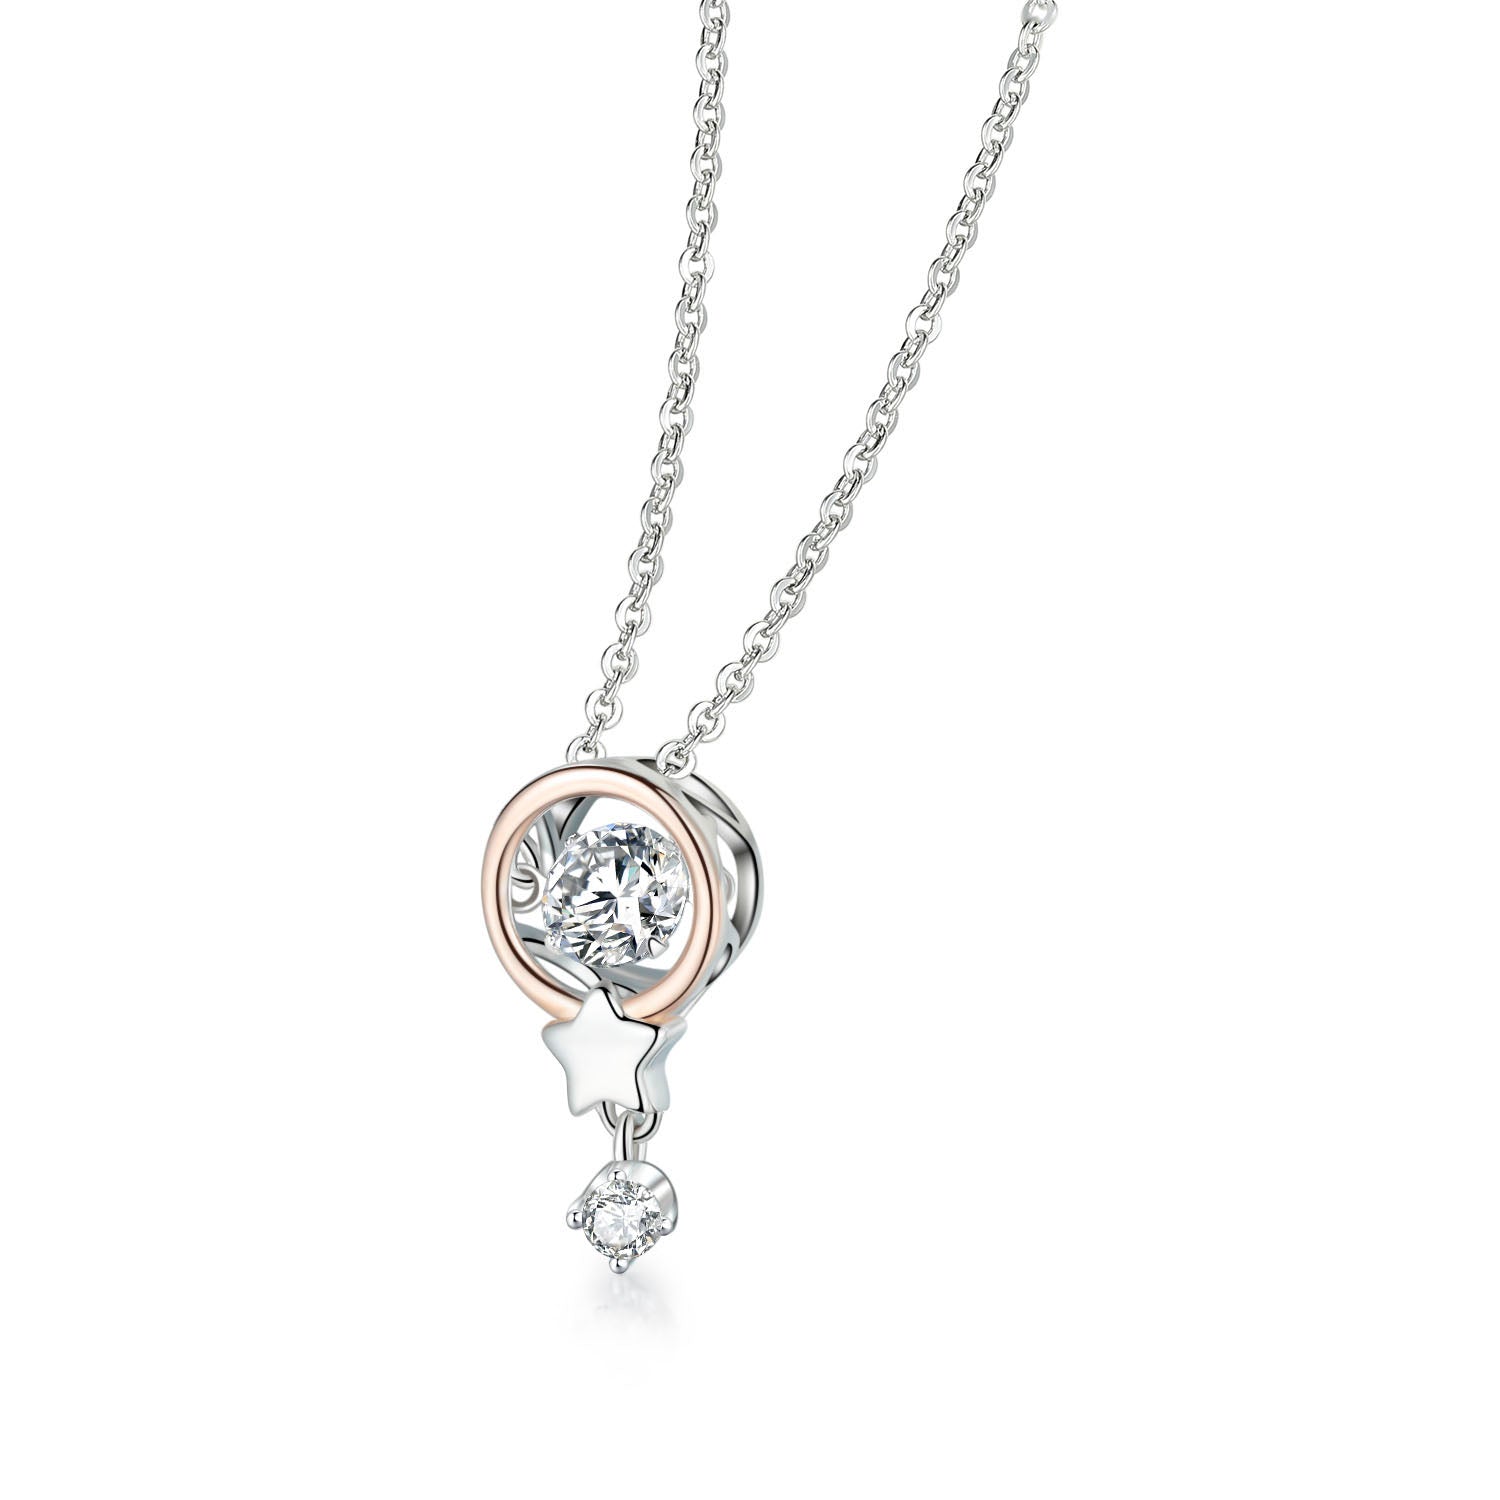 Elegant and smart two-tone 925 sterling silver necklace